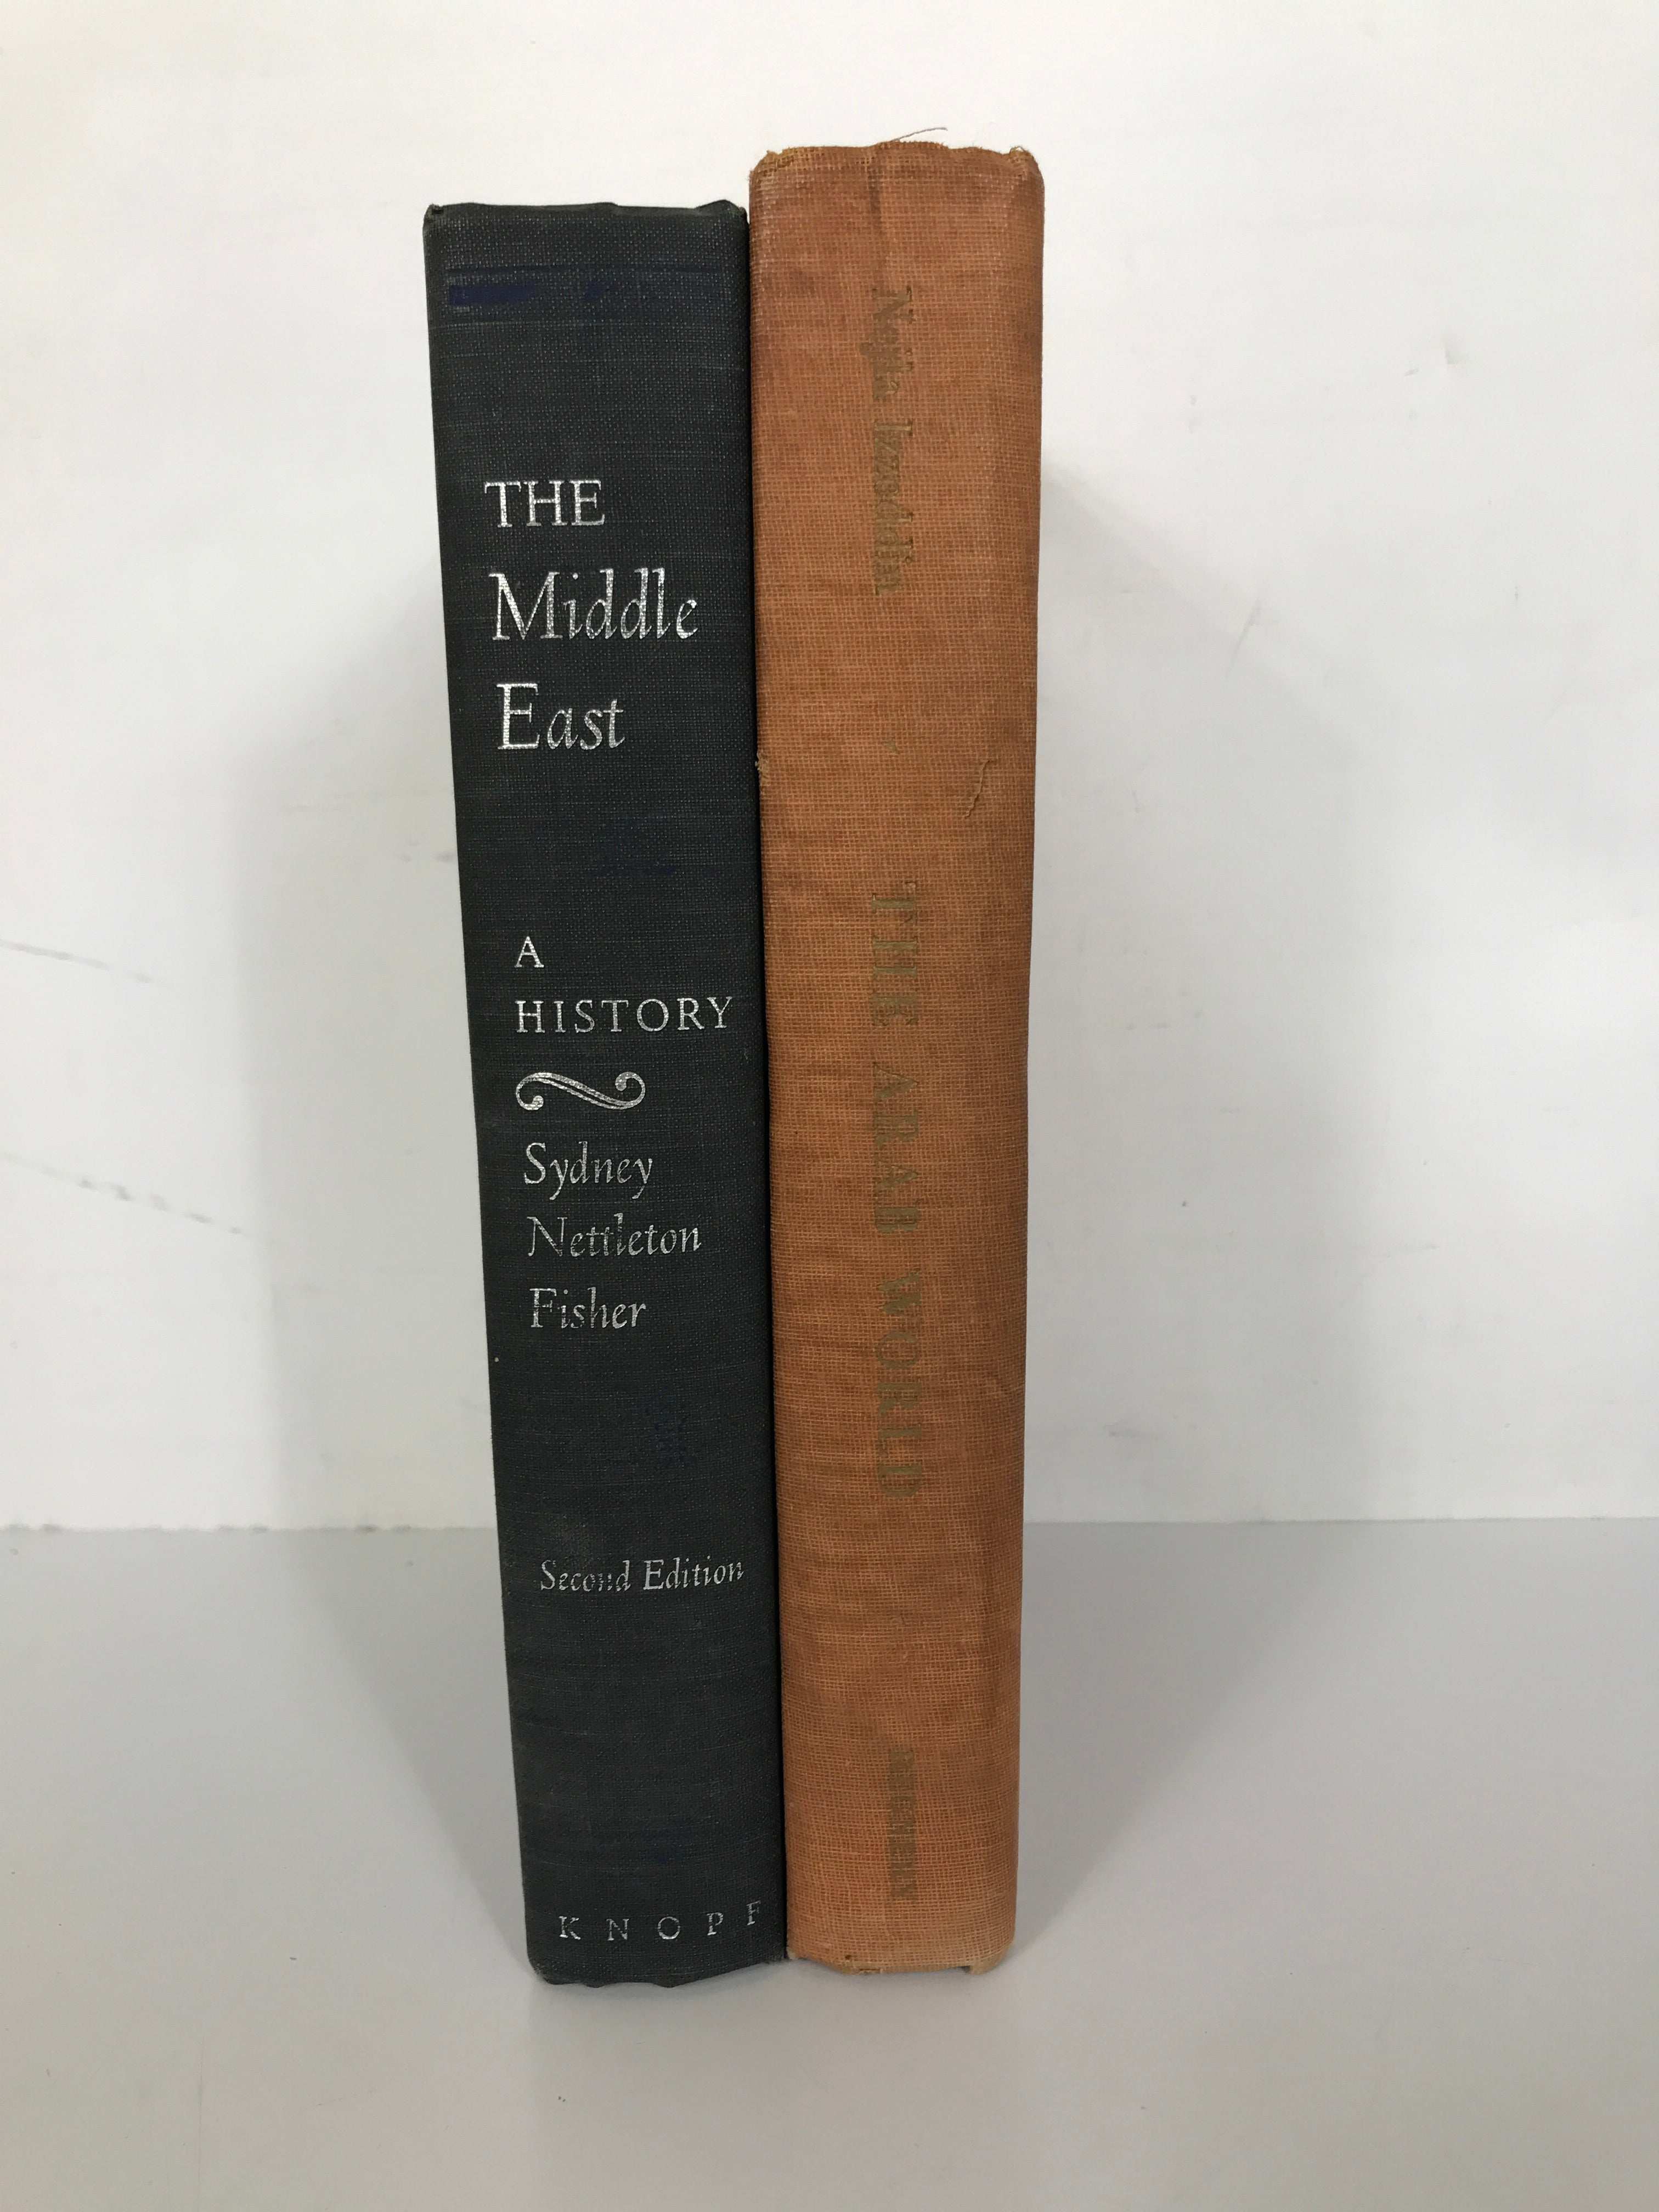 Lot of 2: The Arab World by Izzeddin 1953/The Middle East by Fisher 1969 HC